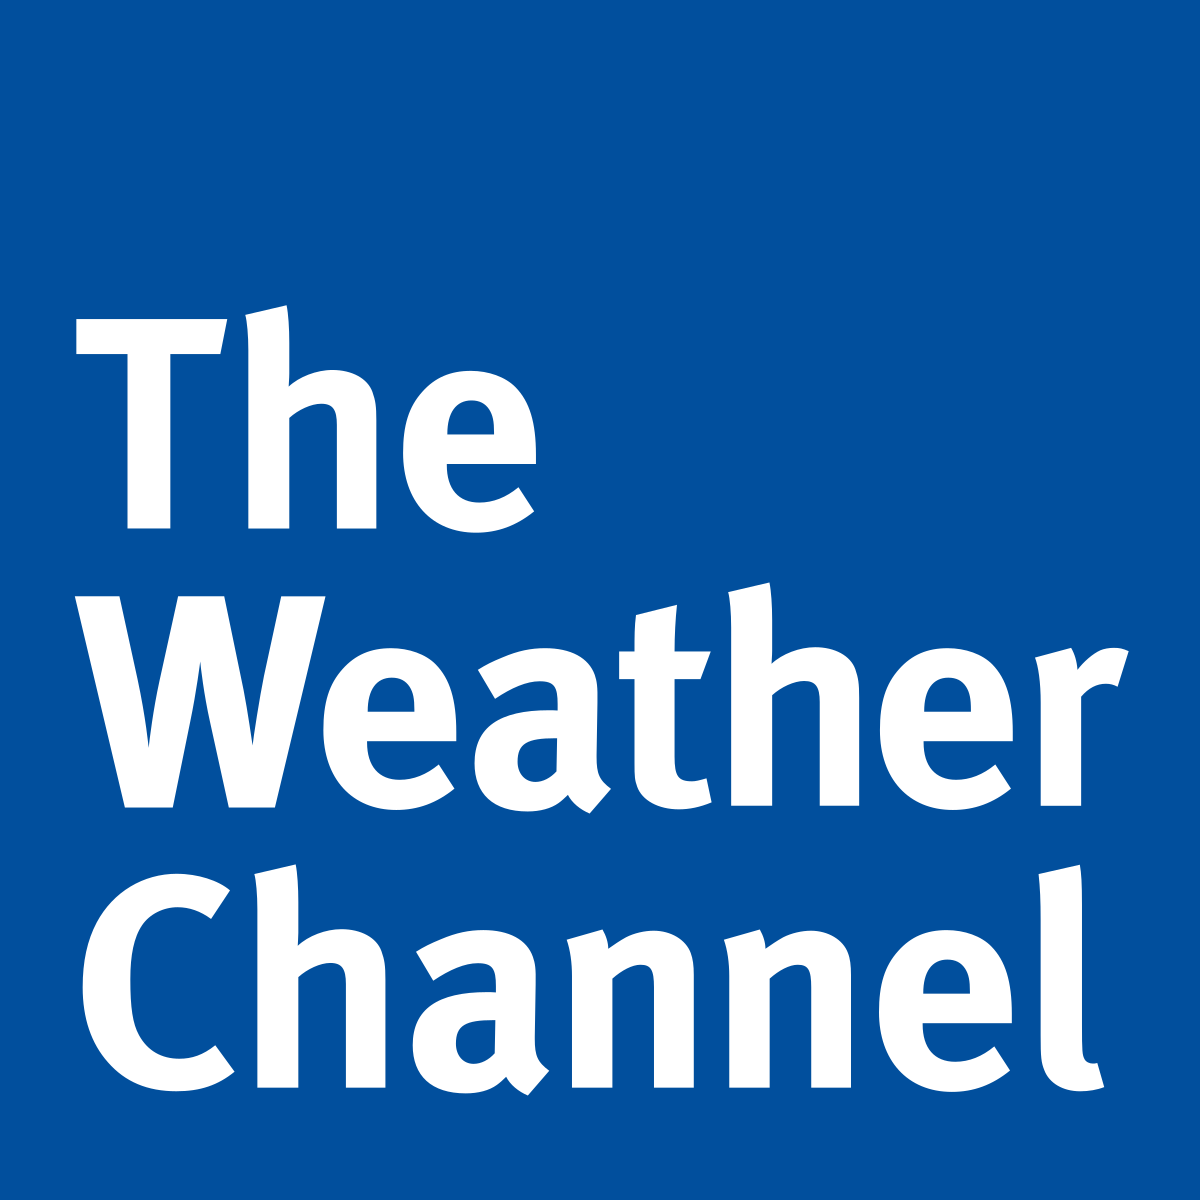 The Weather Channel logo - Tips for using the FF Meta Bold font - Image